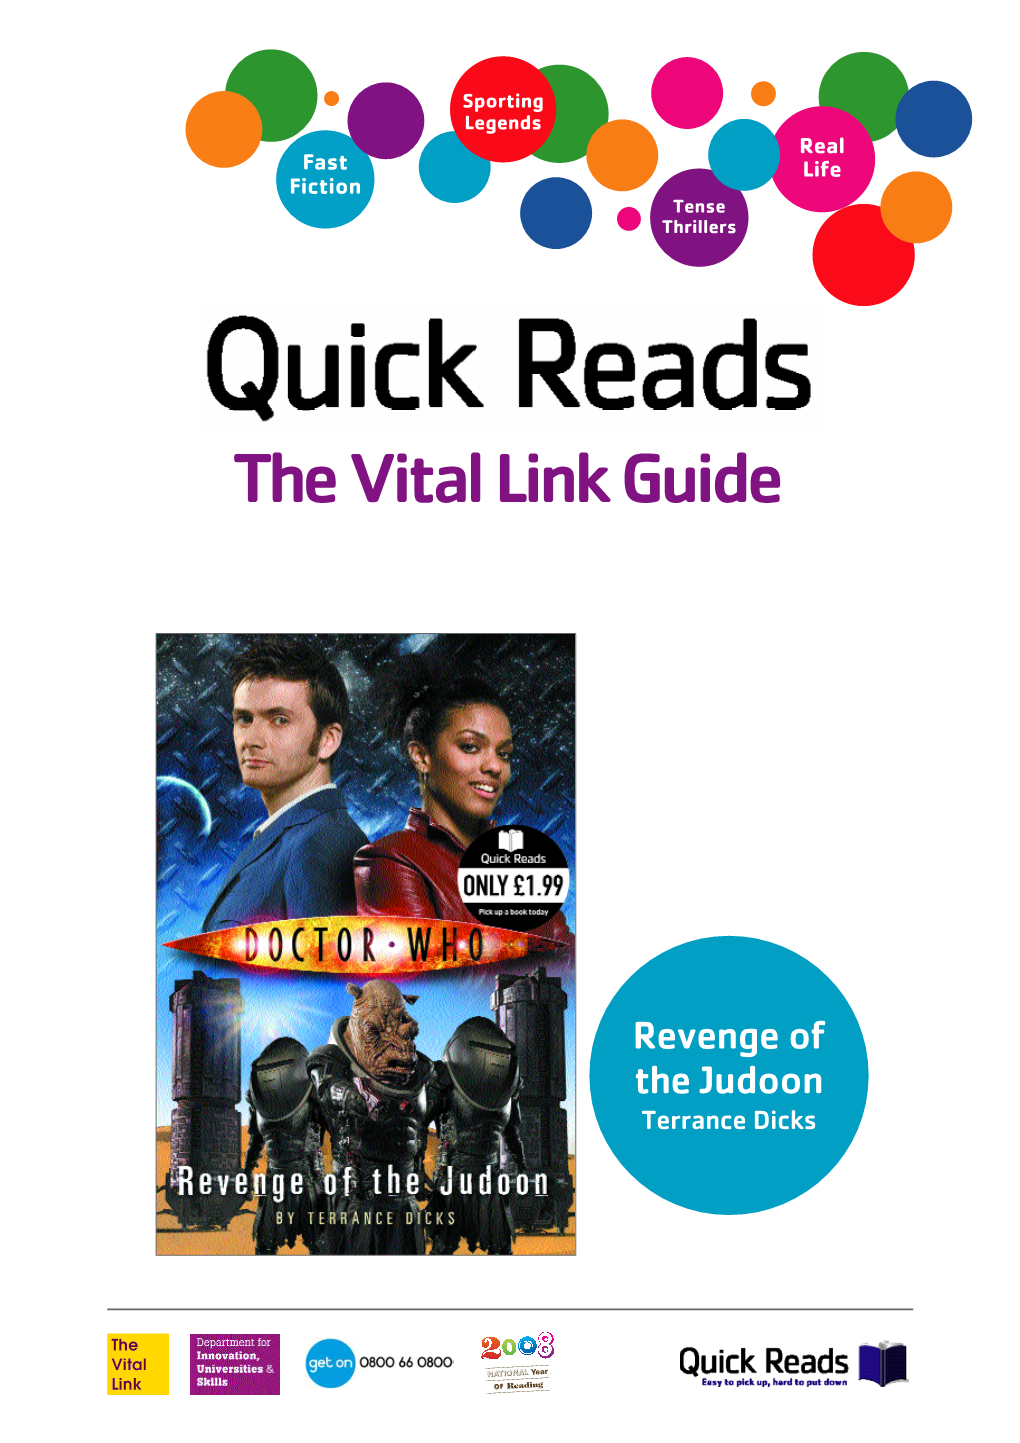 The Vital Link Guide